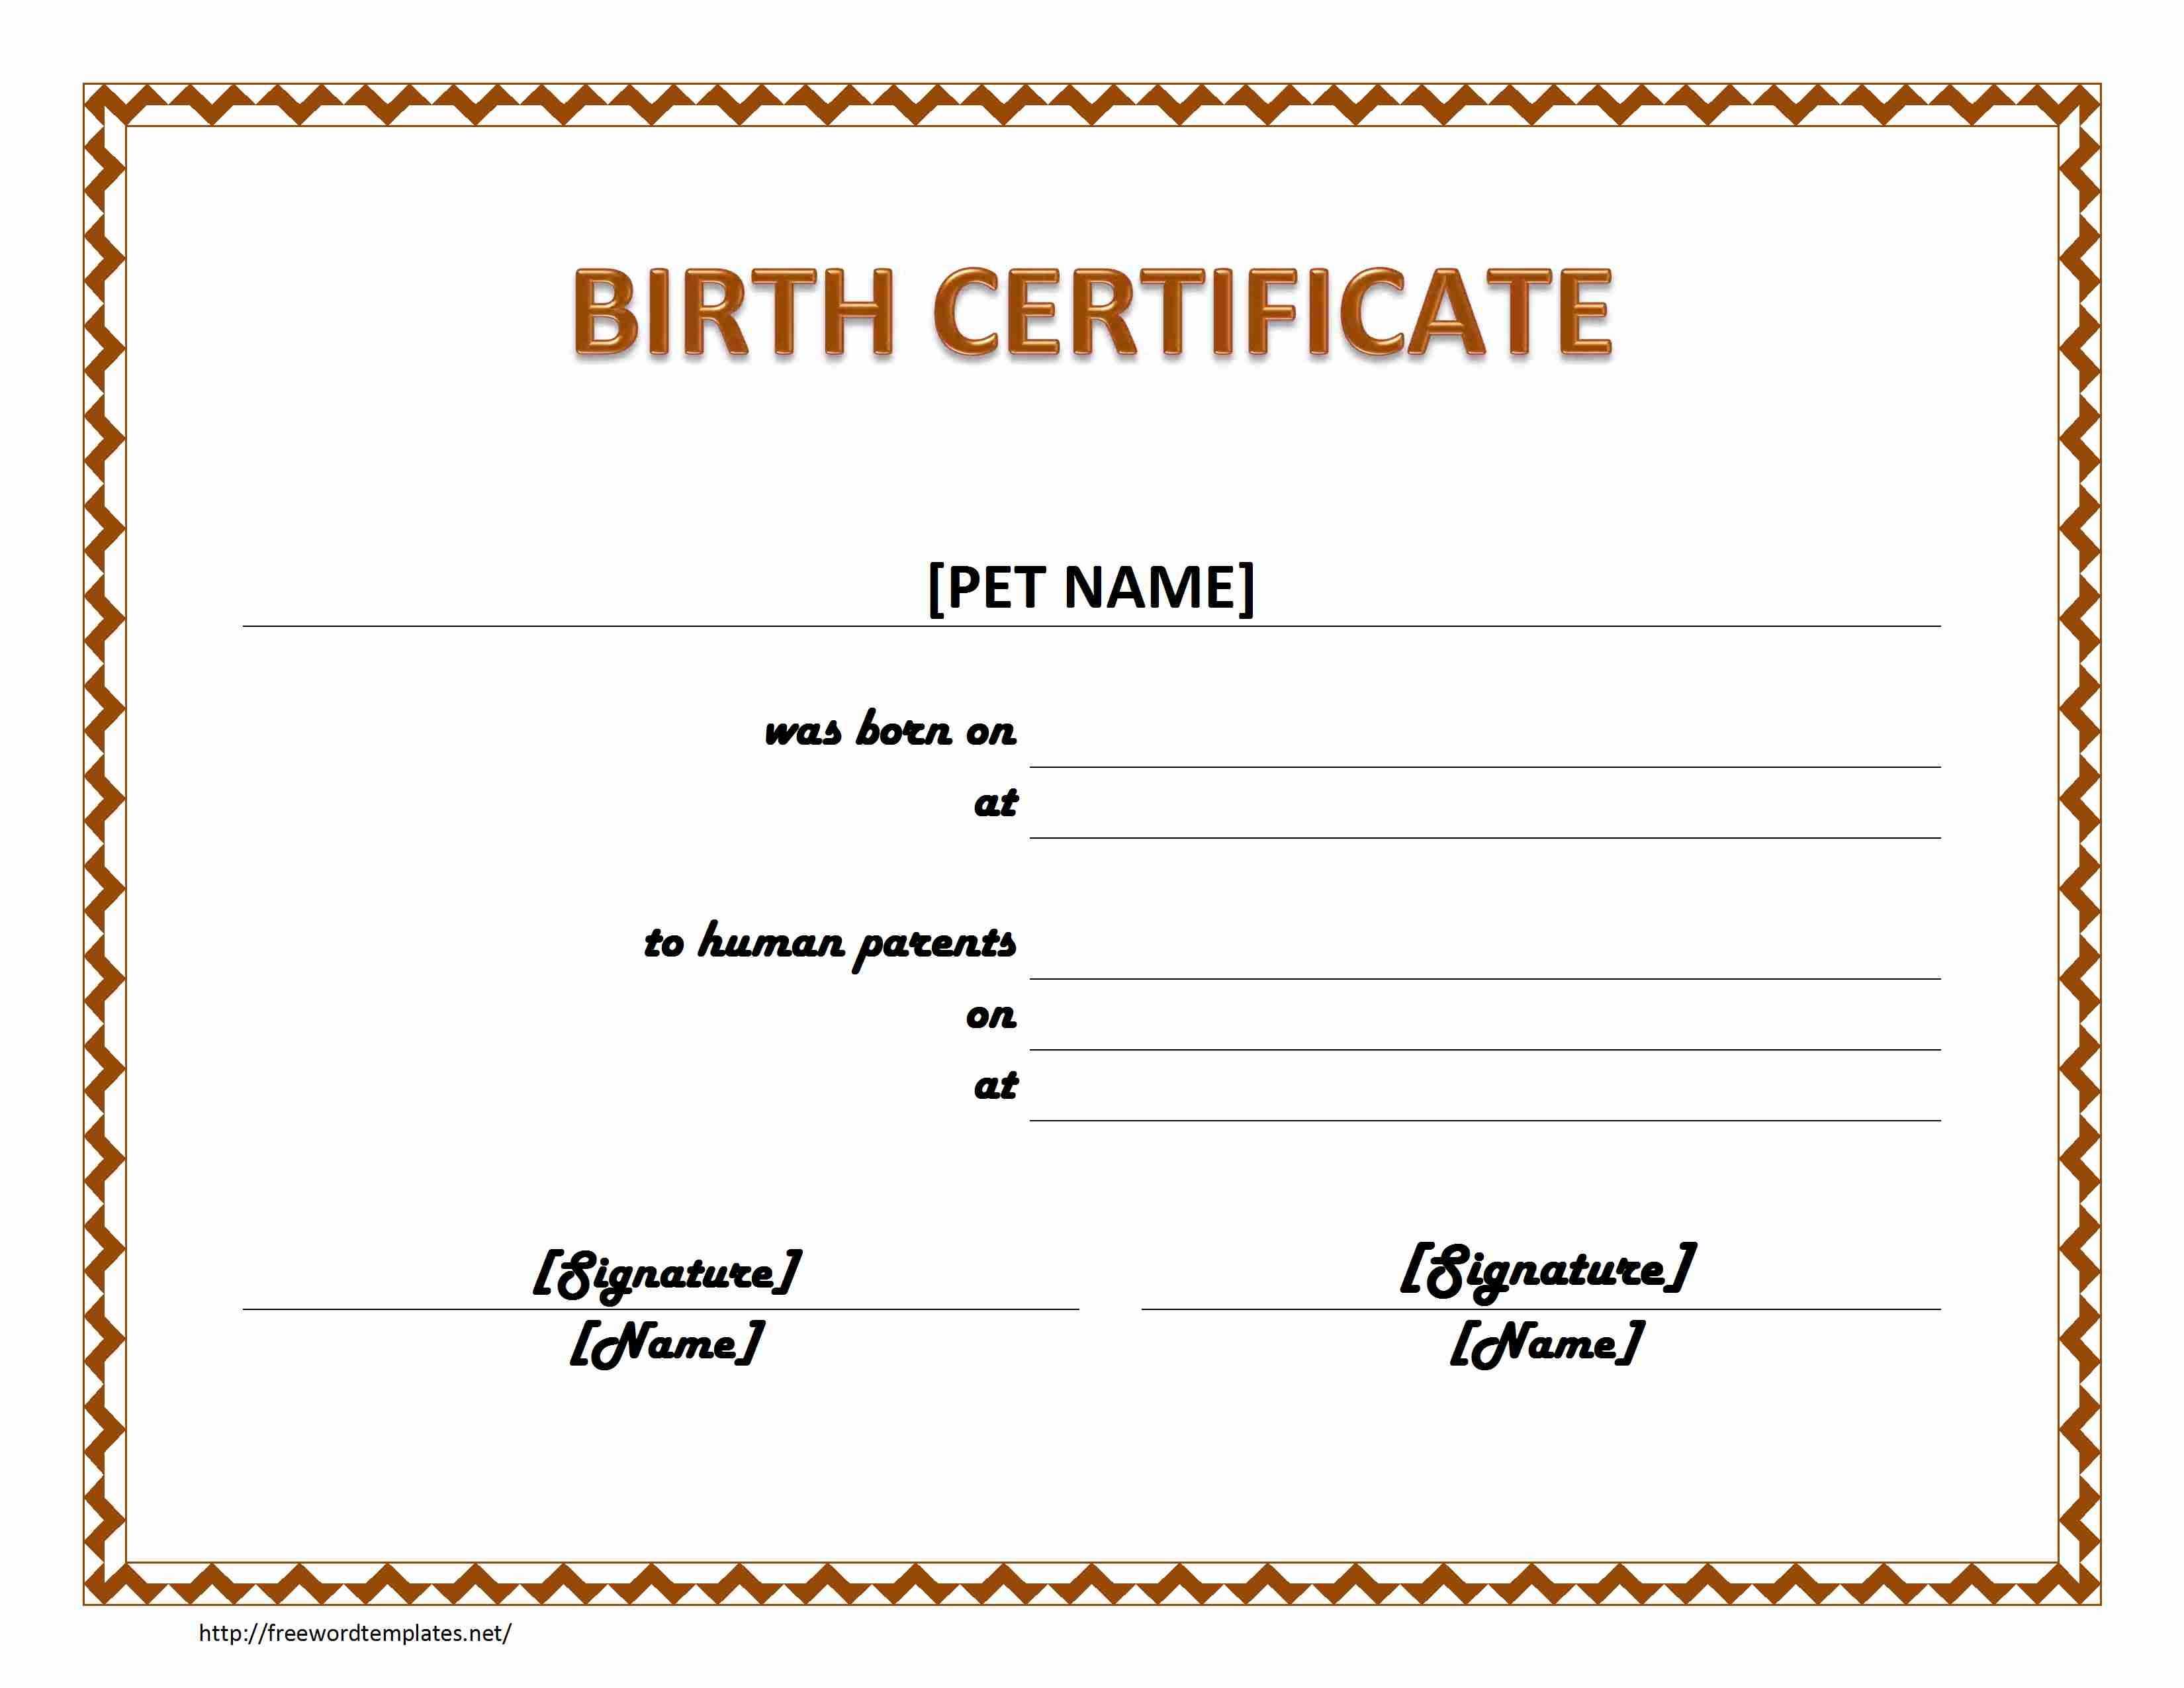 Pet Birth Certificate Maker | Pet Birth Certificate For Word With Regard To Baby Death Certificate Template